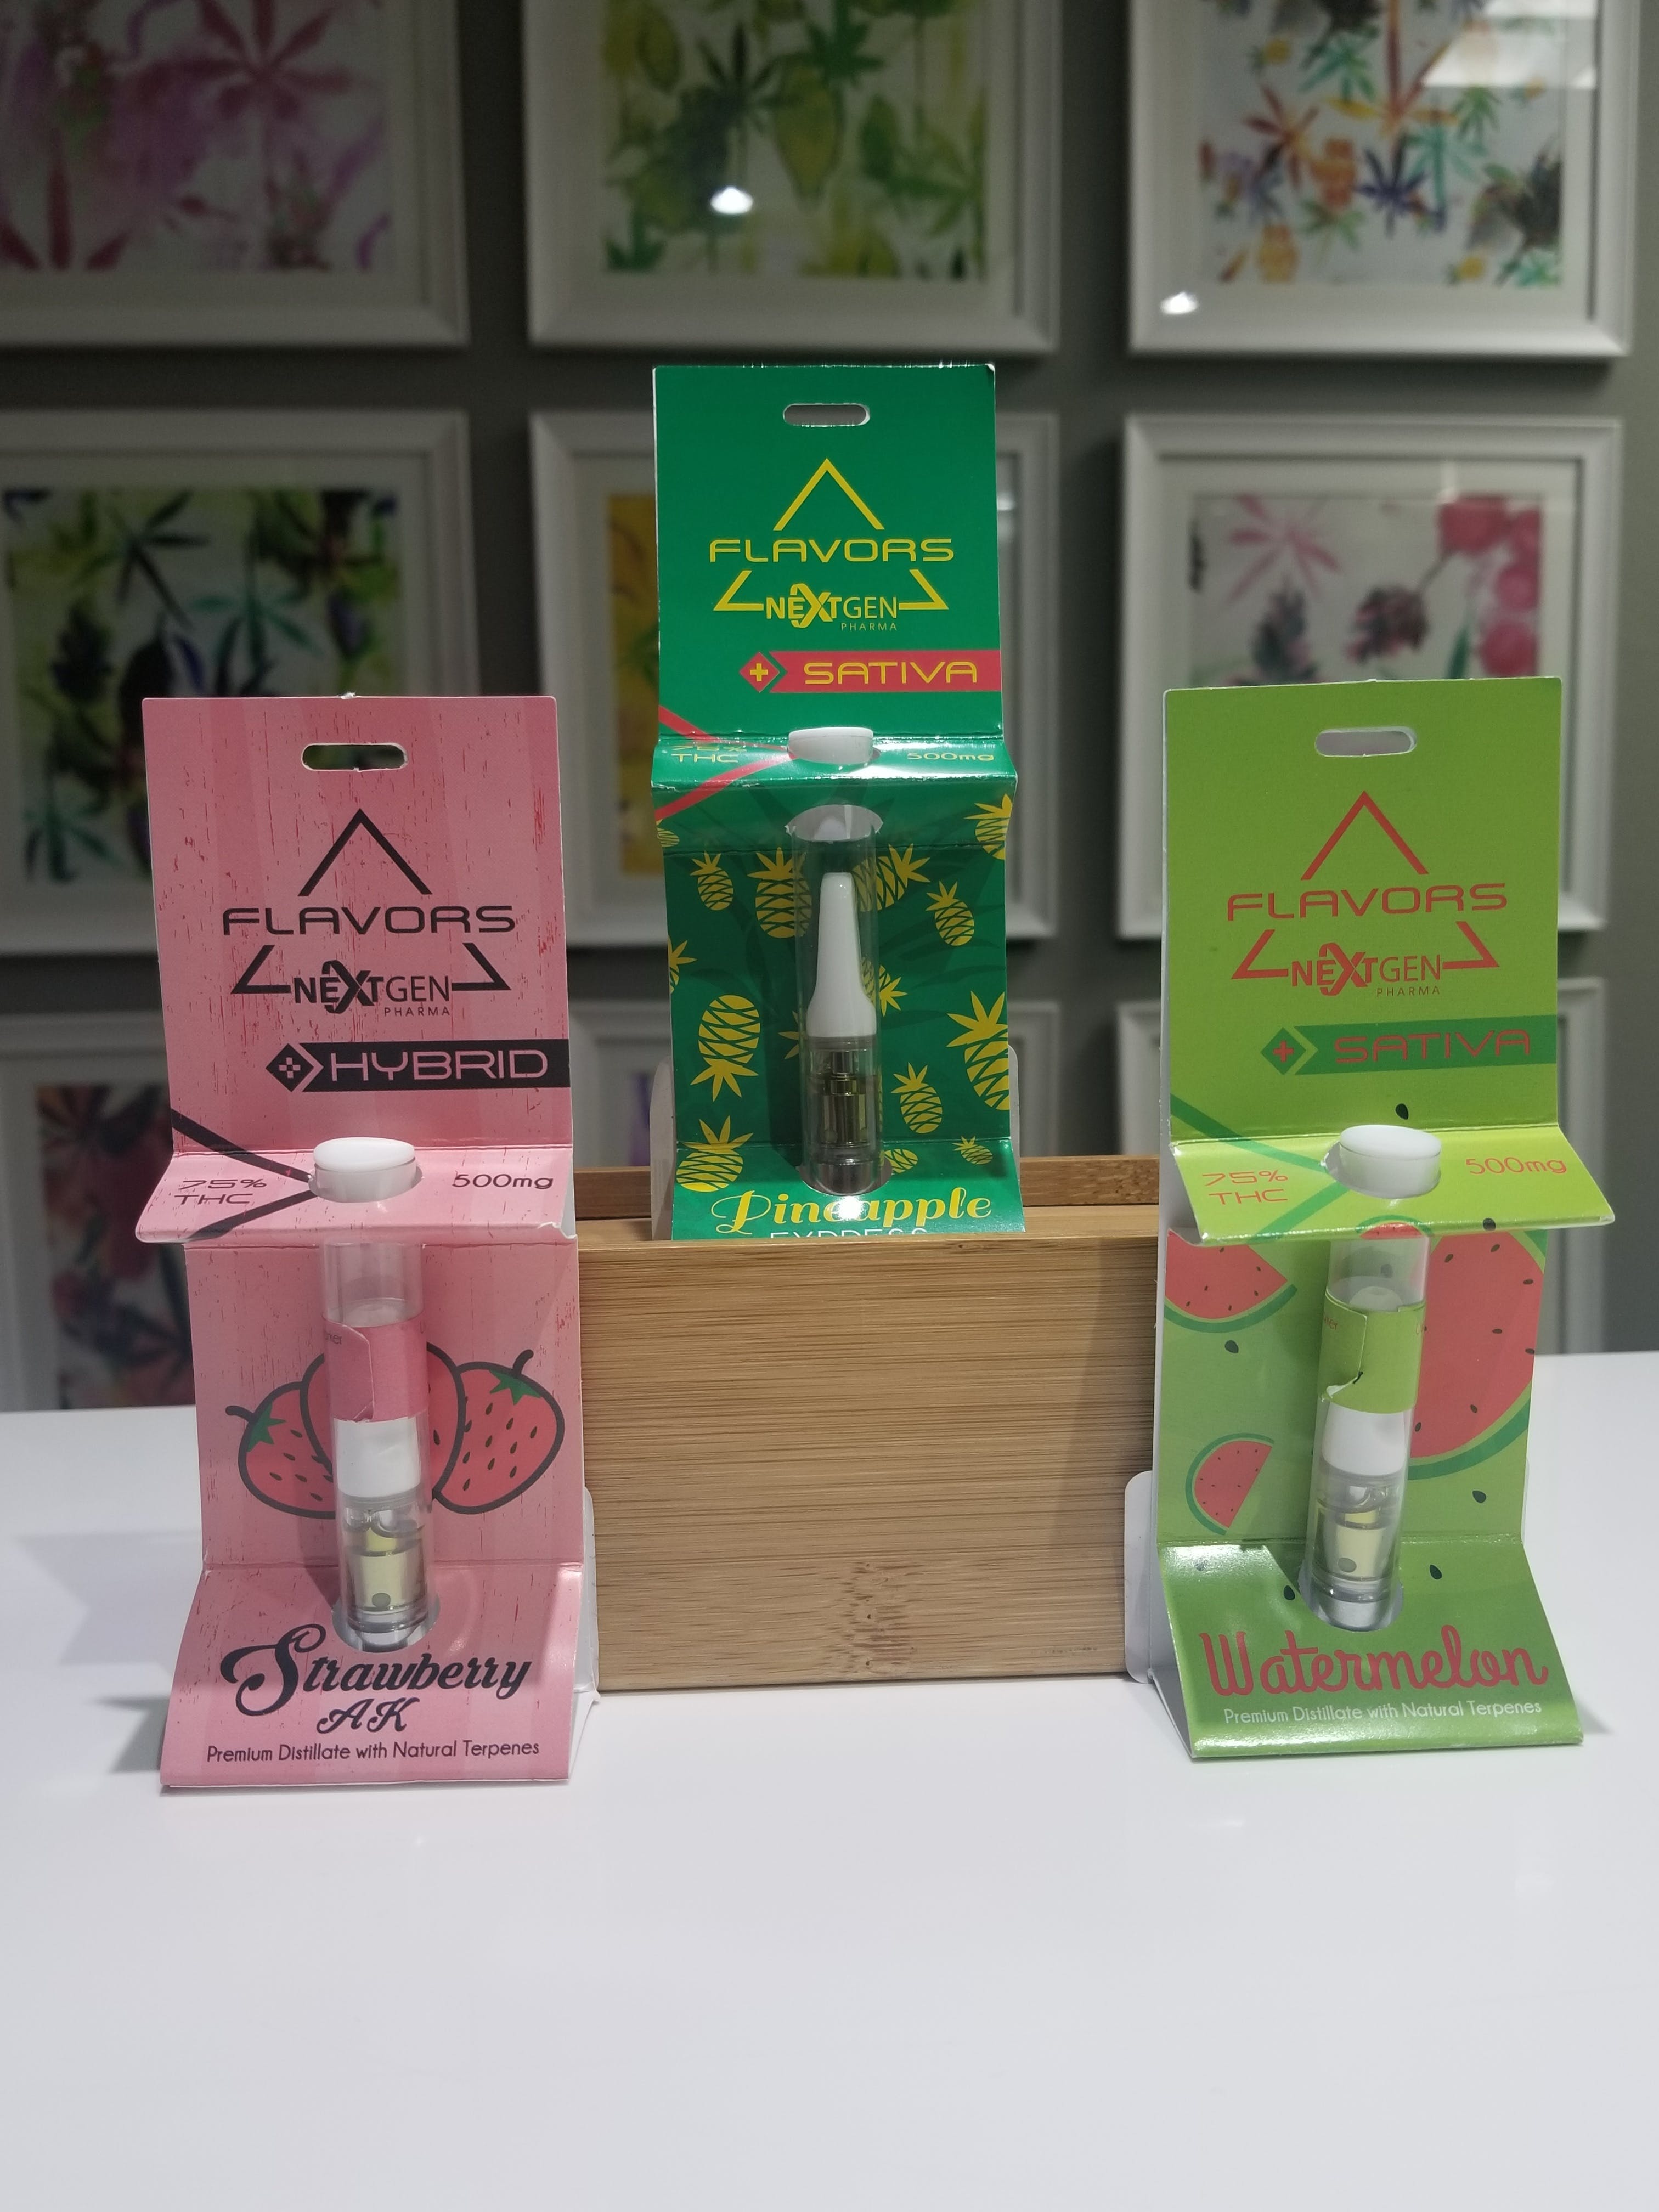 concentrate-flavors-cartridge-500mg-strawberry-ak